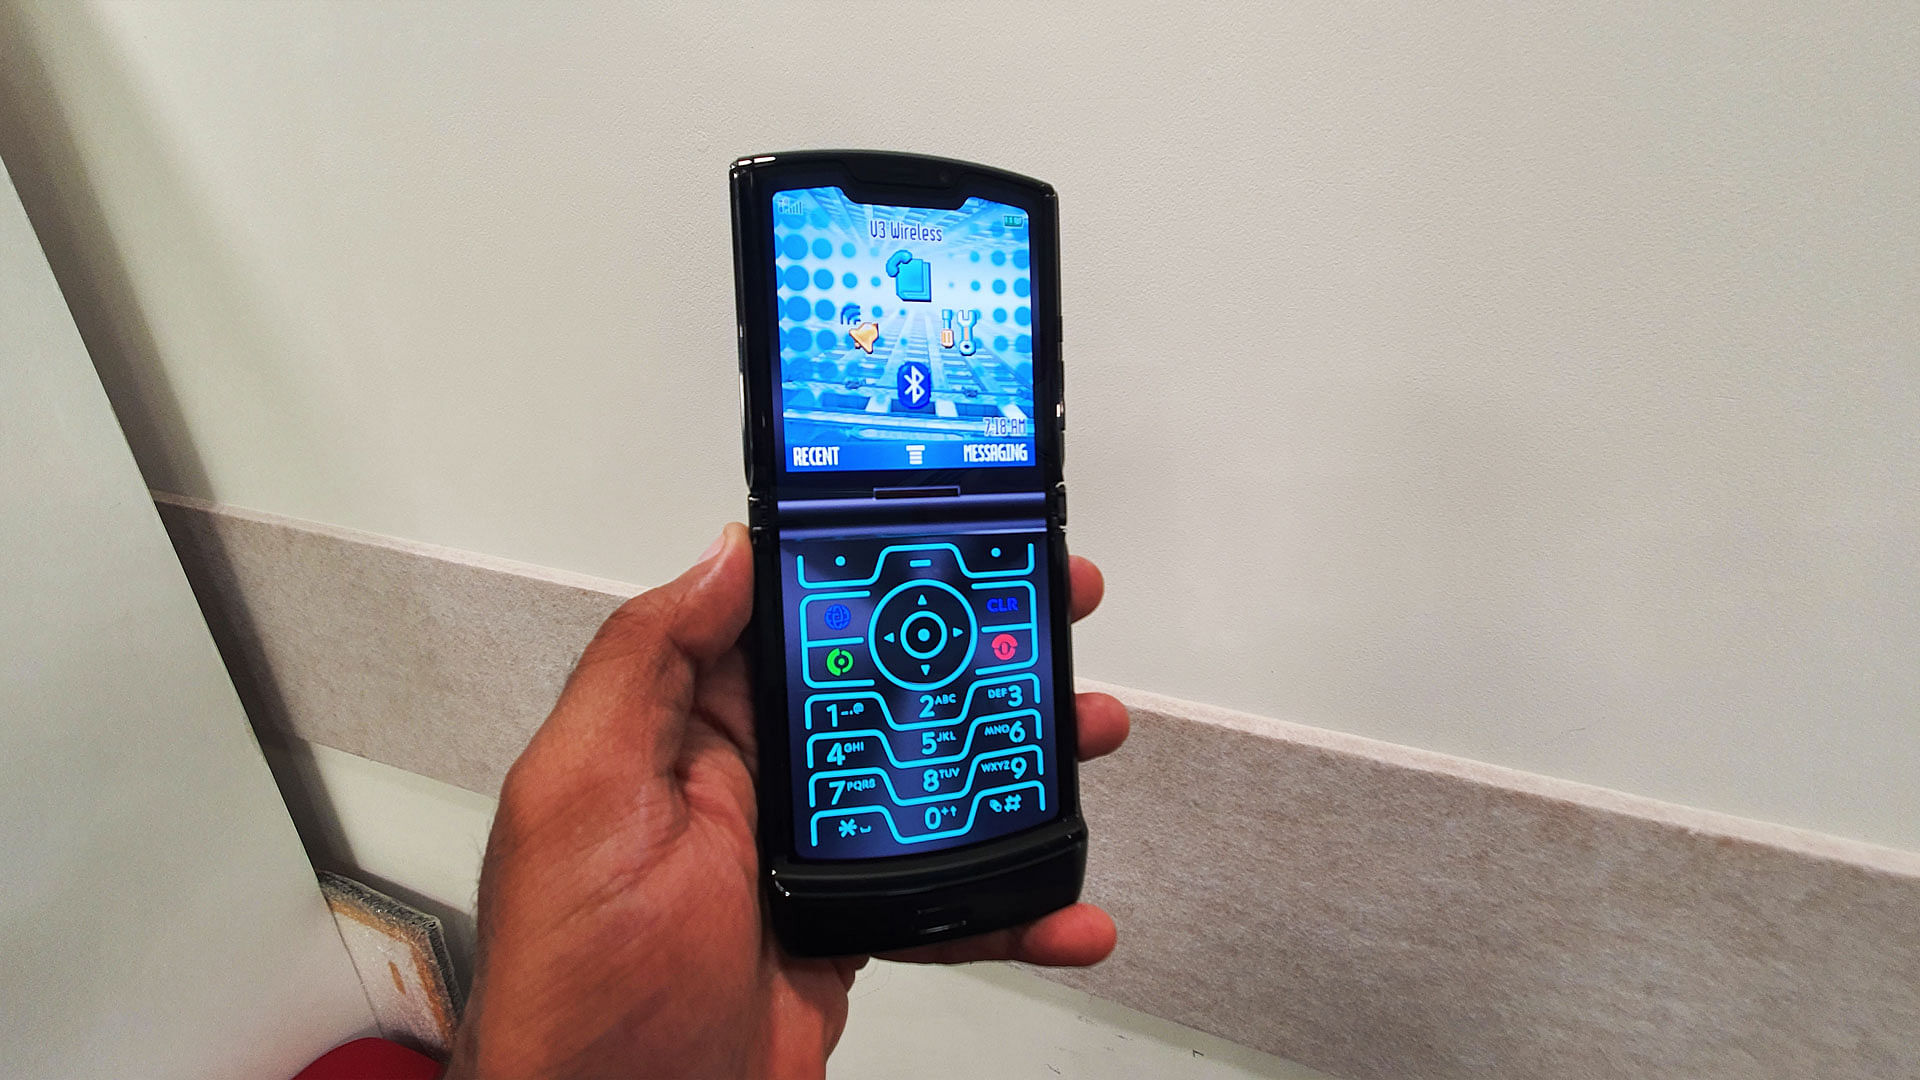 The new Moto Razr has a mode where you can transform the display to look like the old Moto Razr phone.&nbsp;